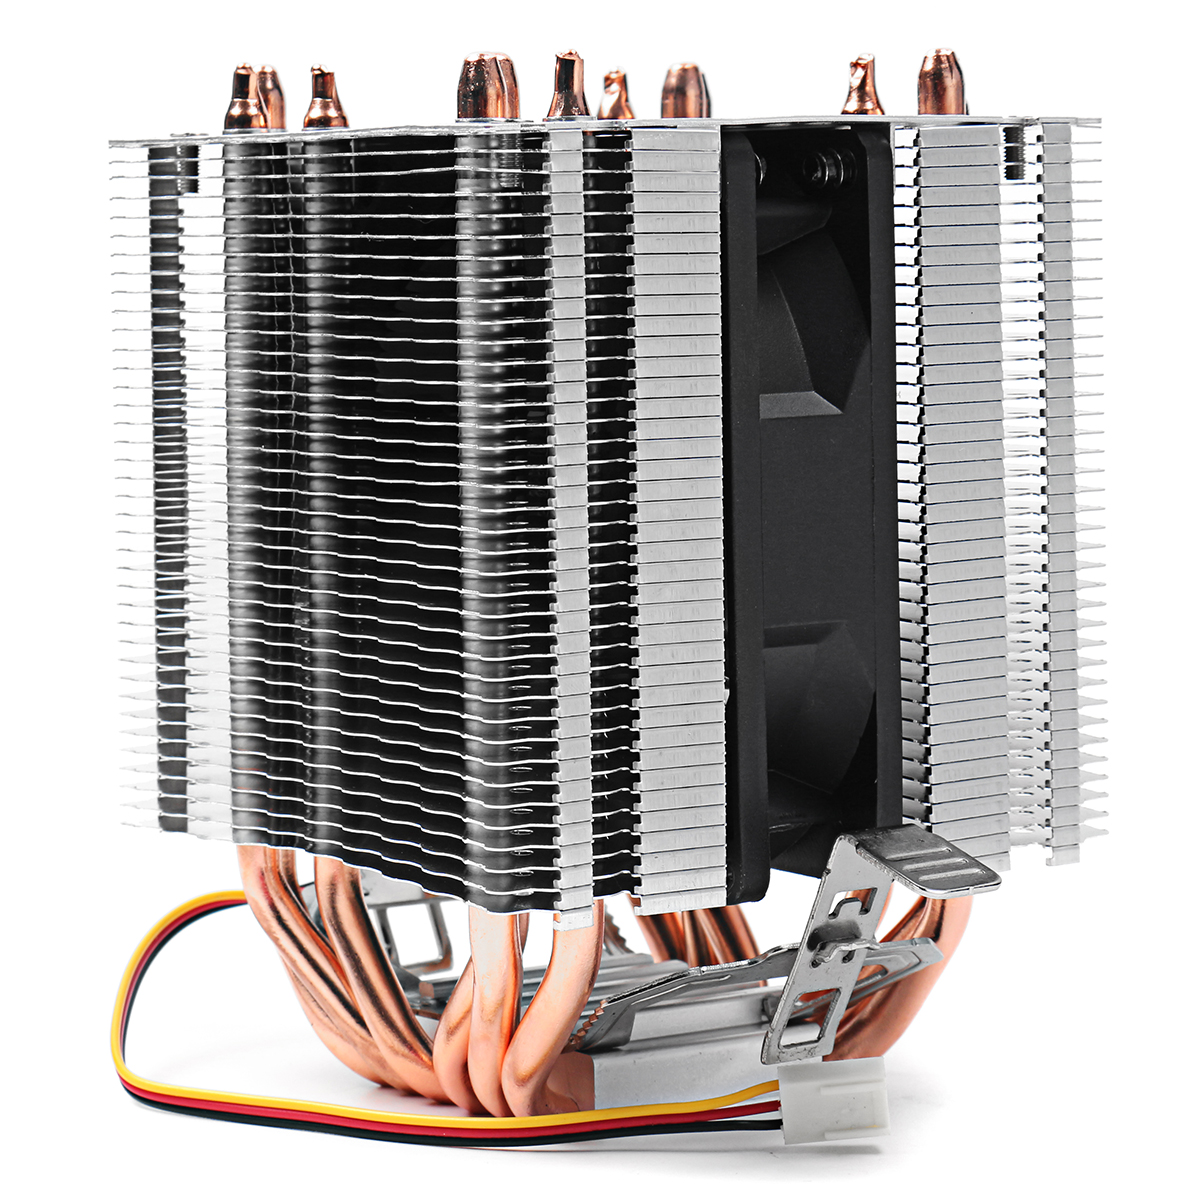 

DC 12V 4Pin 2200RPM CPU Cooling Fan Cooler Heat Sink For Intel AMD